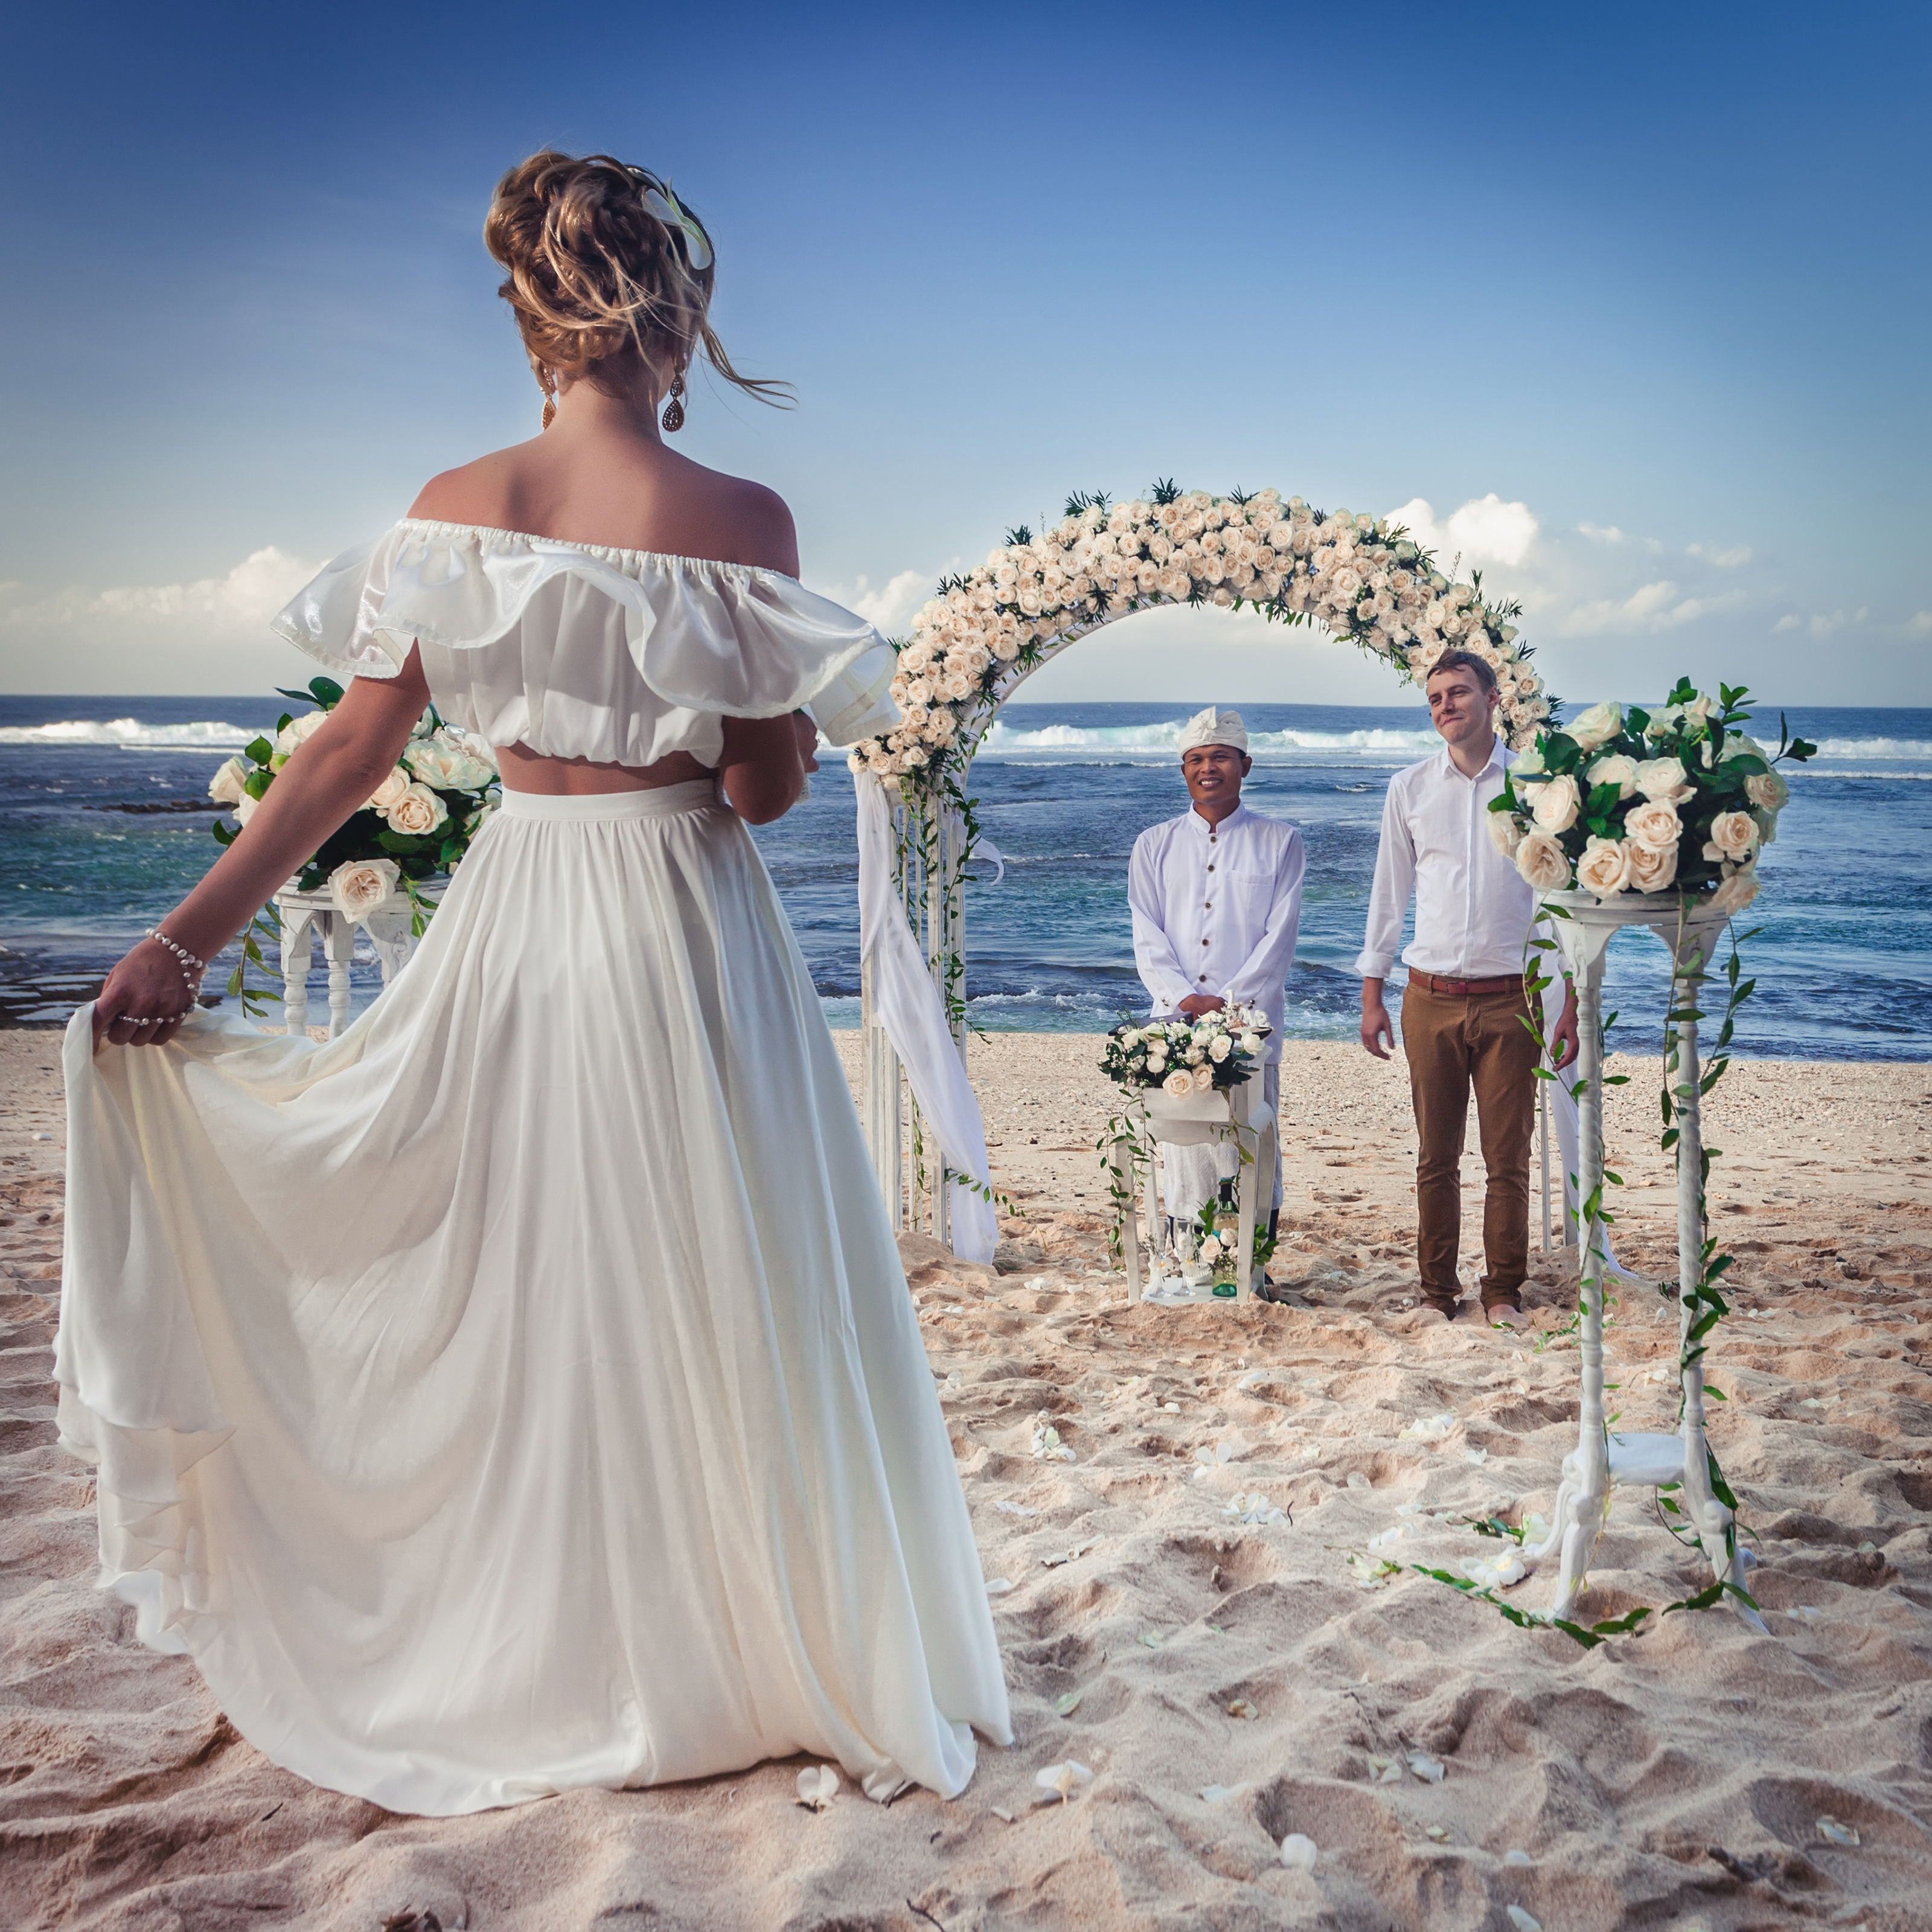 Wedding couple just married at the beach, Bali. Wedding ceremony